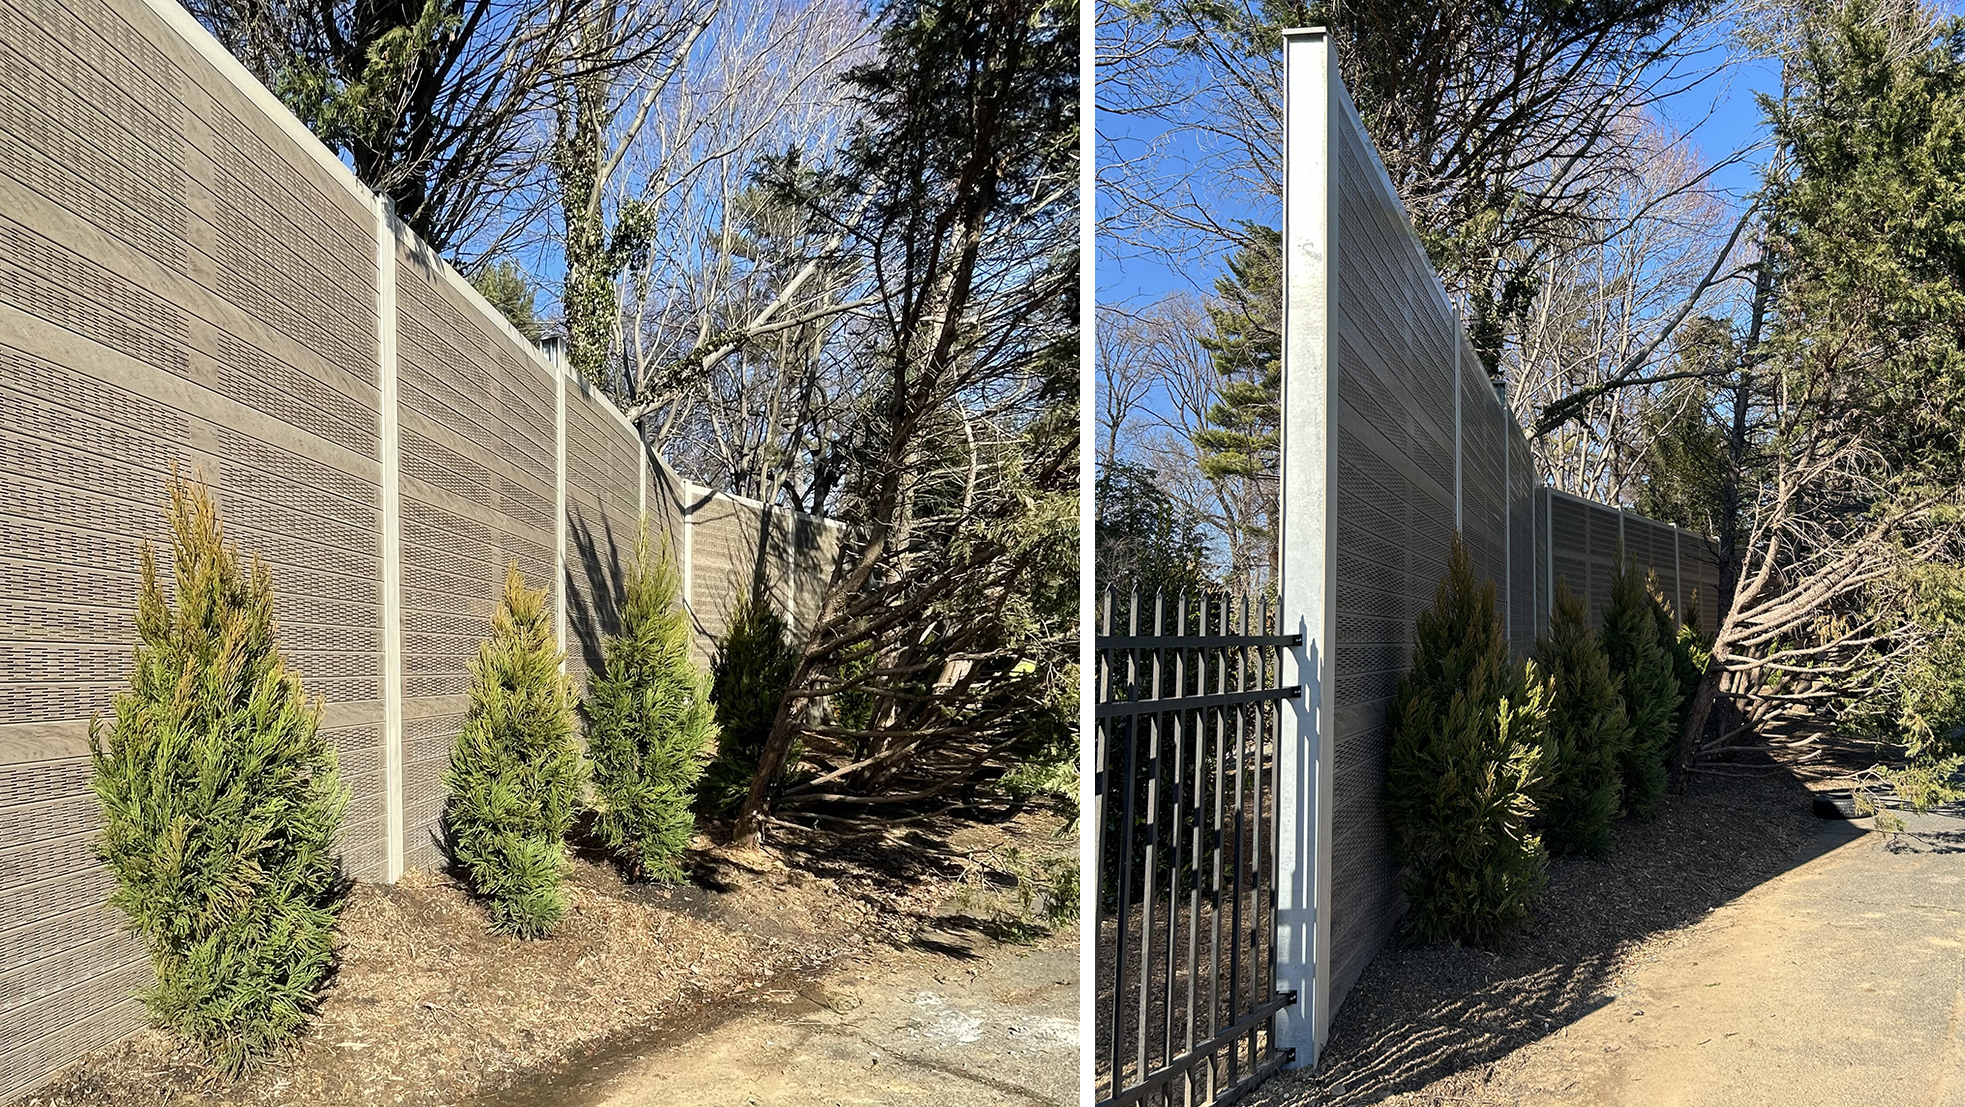 Detail views of sports field noise barrier wall running through wooded area